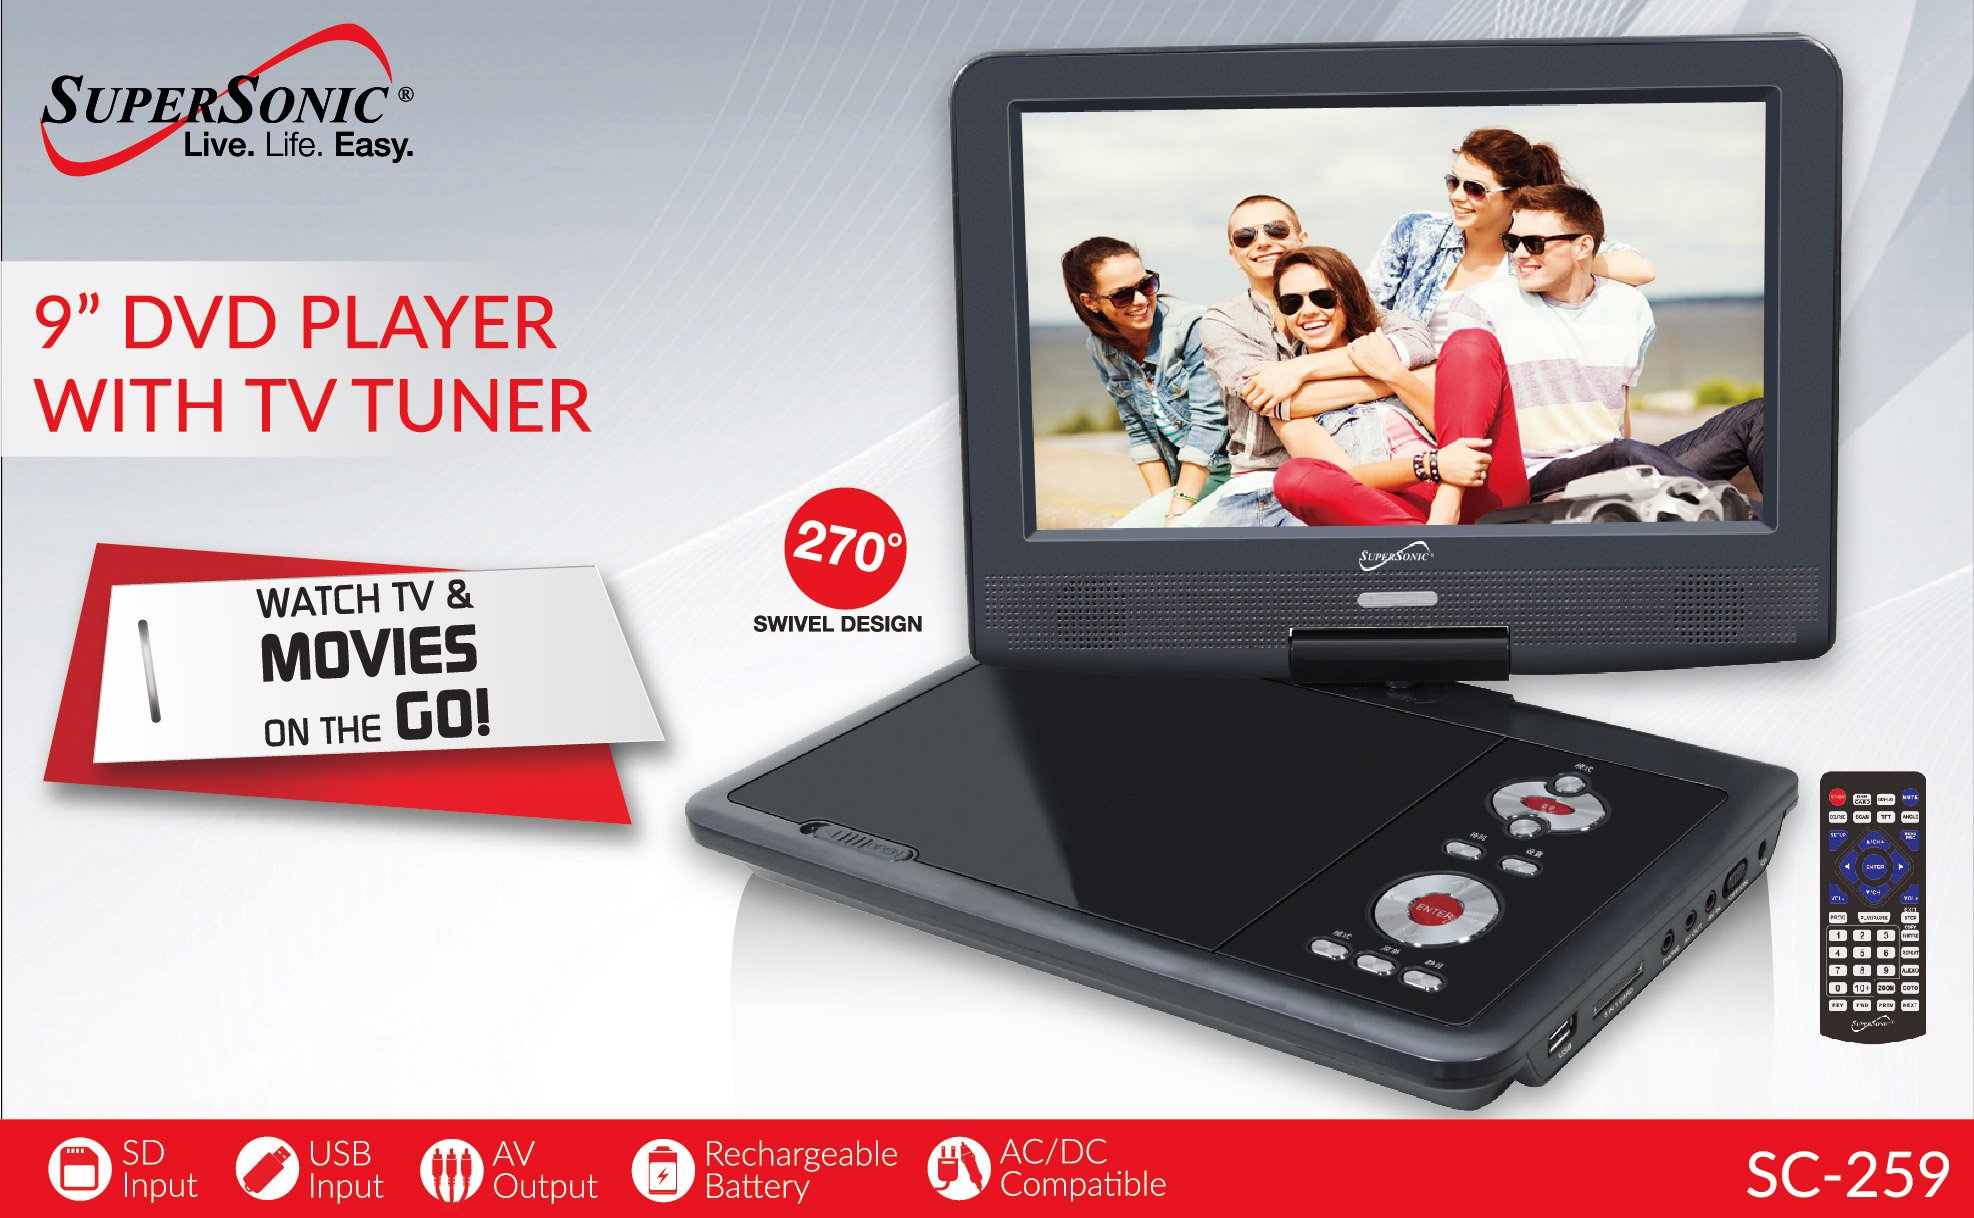 Supersonic Portable Dvd Player With Tv Turner Shop Tv Video At H E B